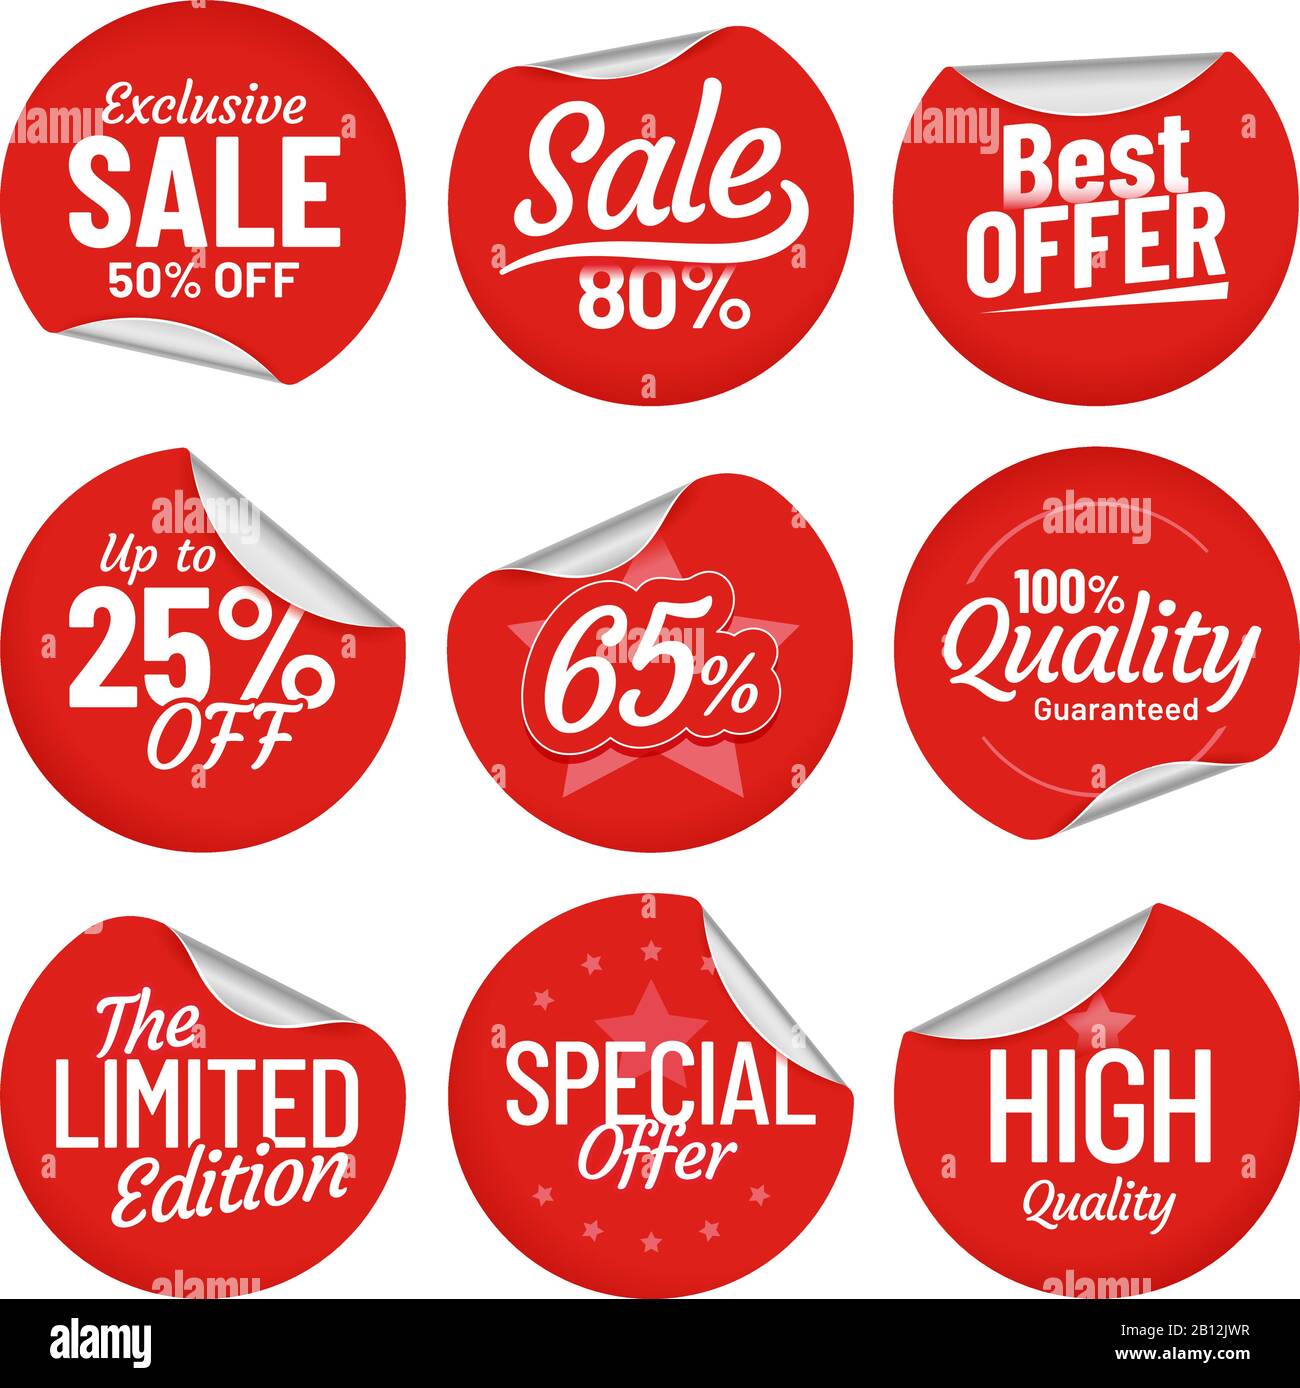 Buy 1 Get 1 Half Price Bright Red Promotional Sale Stickers Sticky Labels Tags 